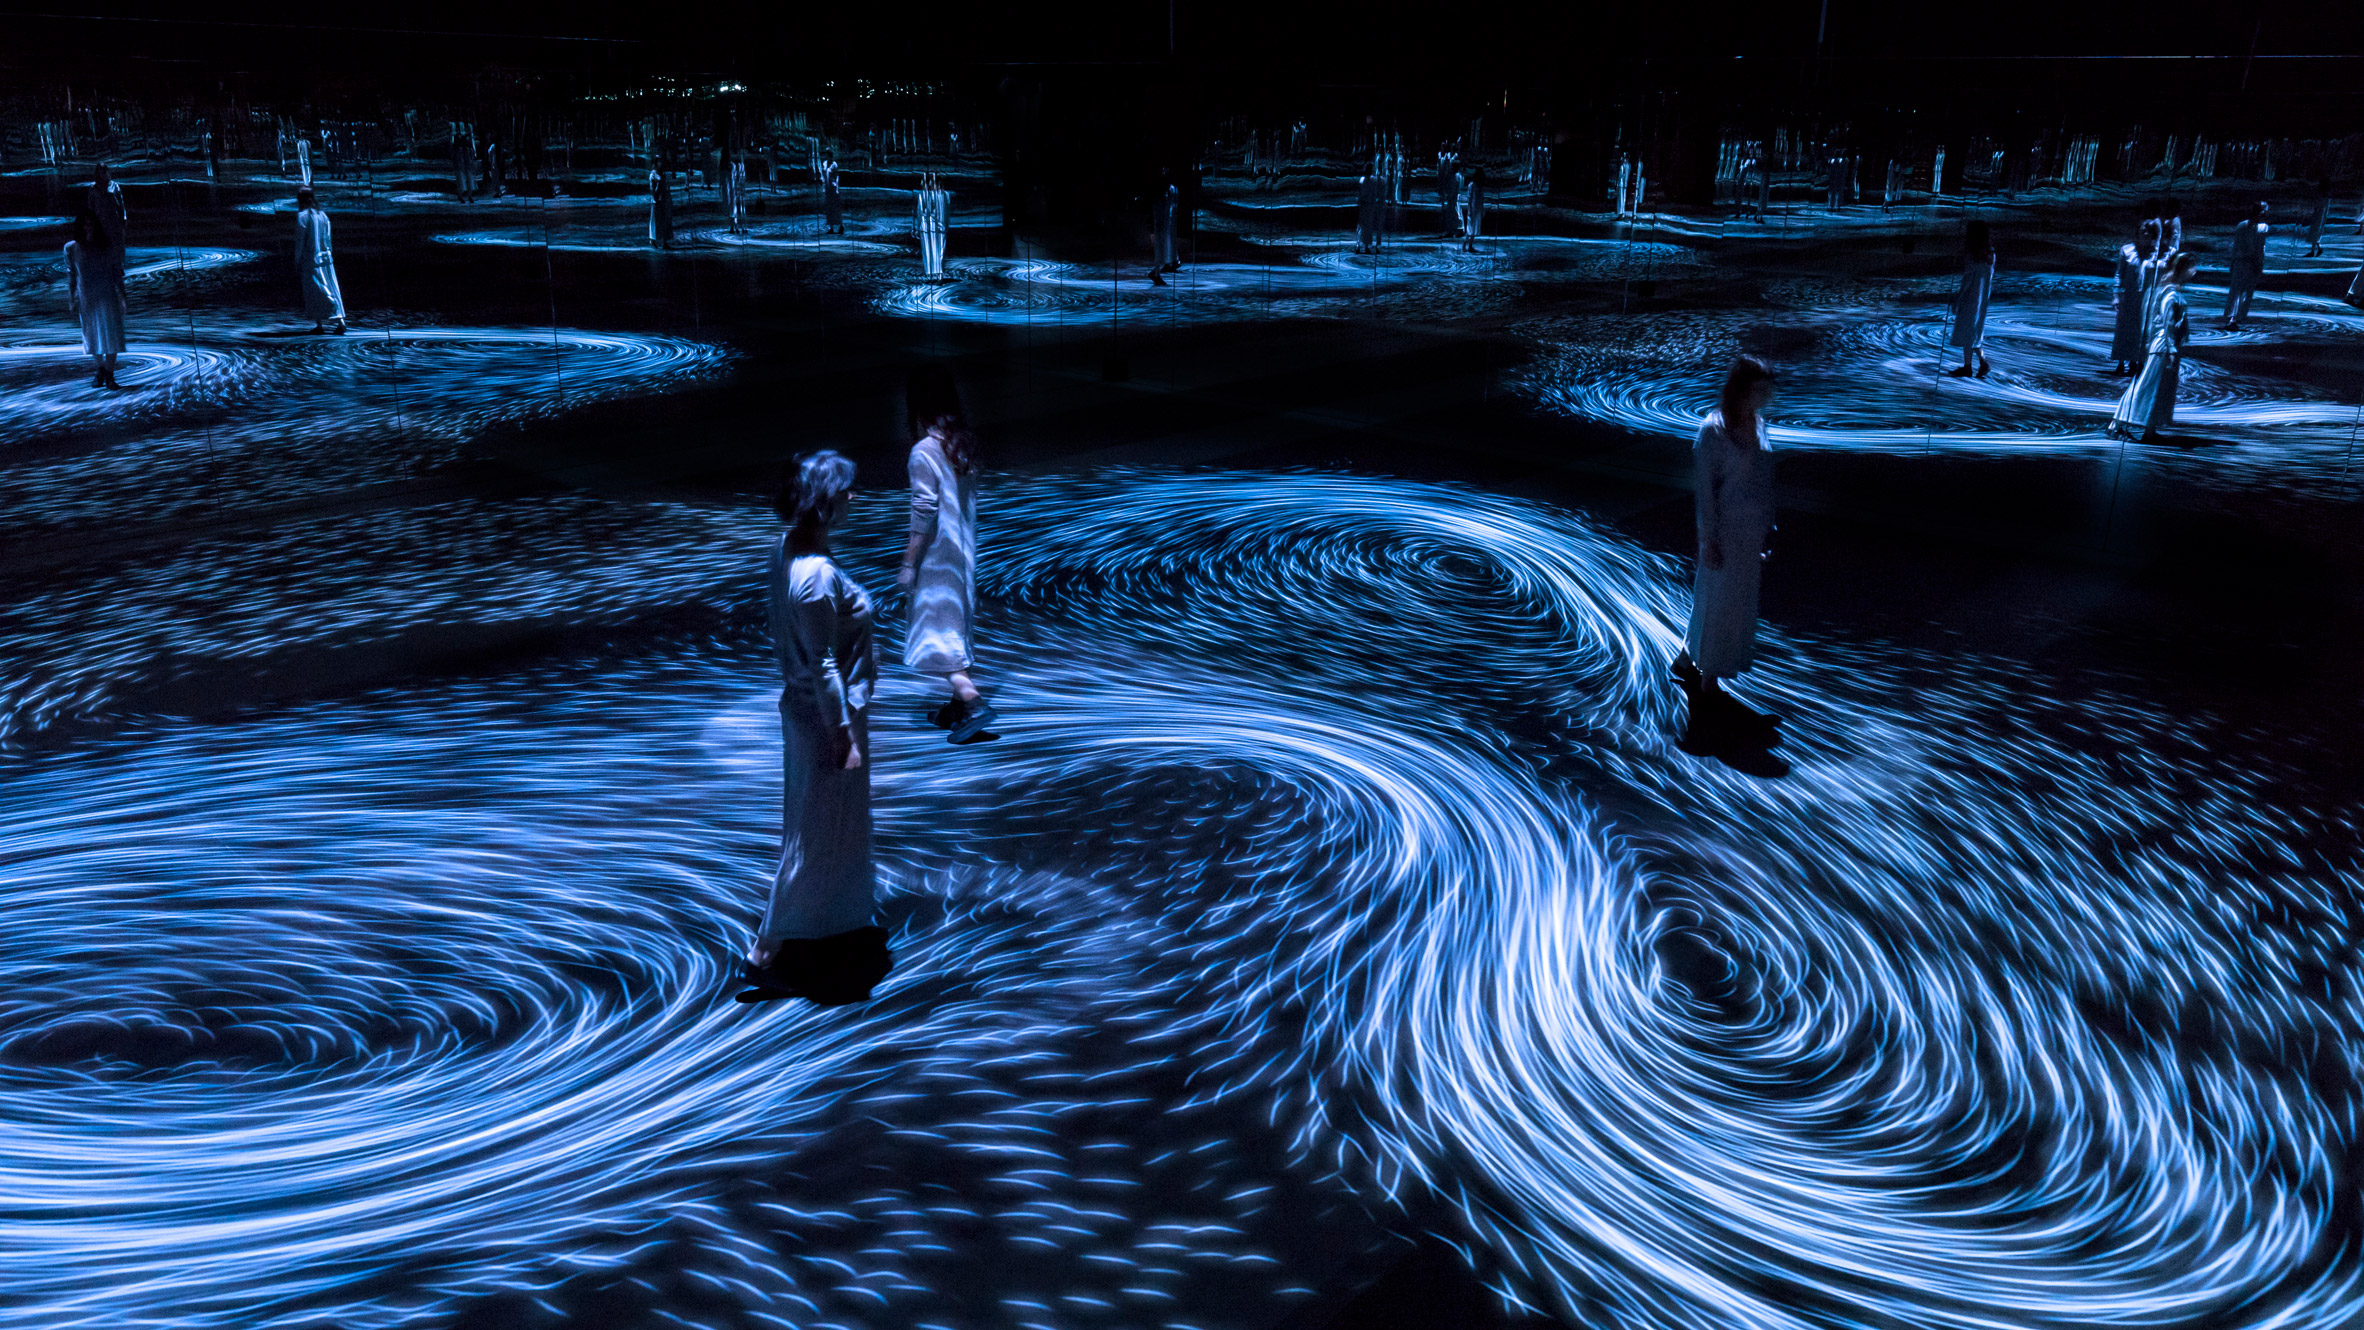 TeamLab creates interactive whirlpools inside National Gallery of Victoria